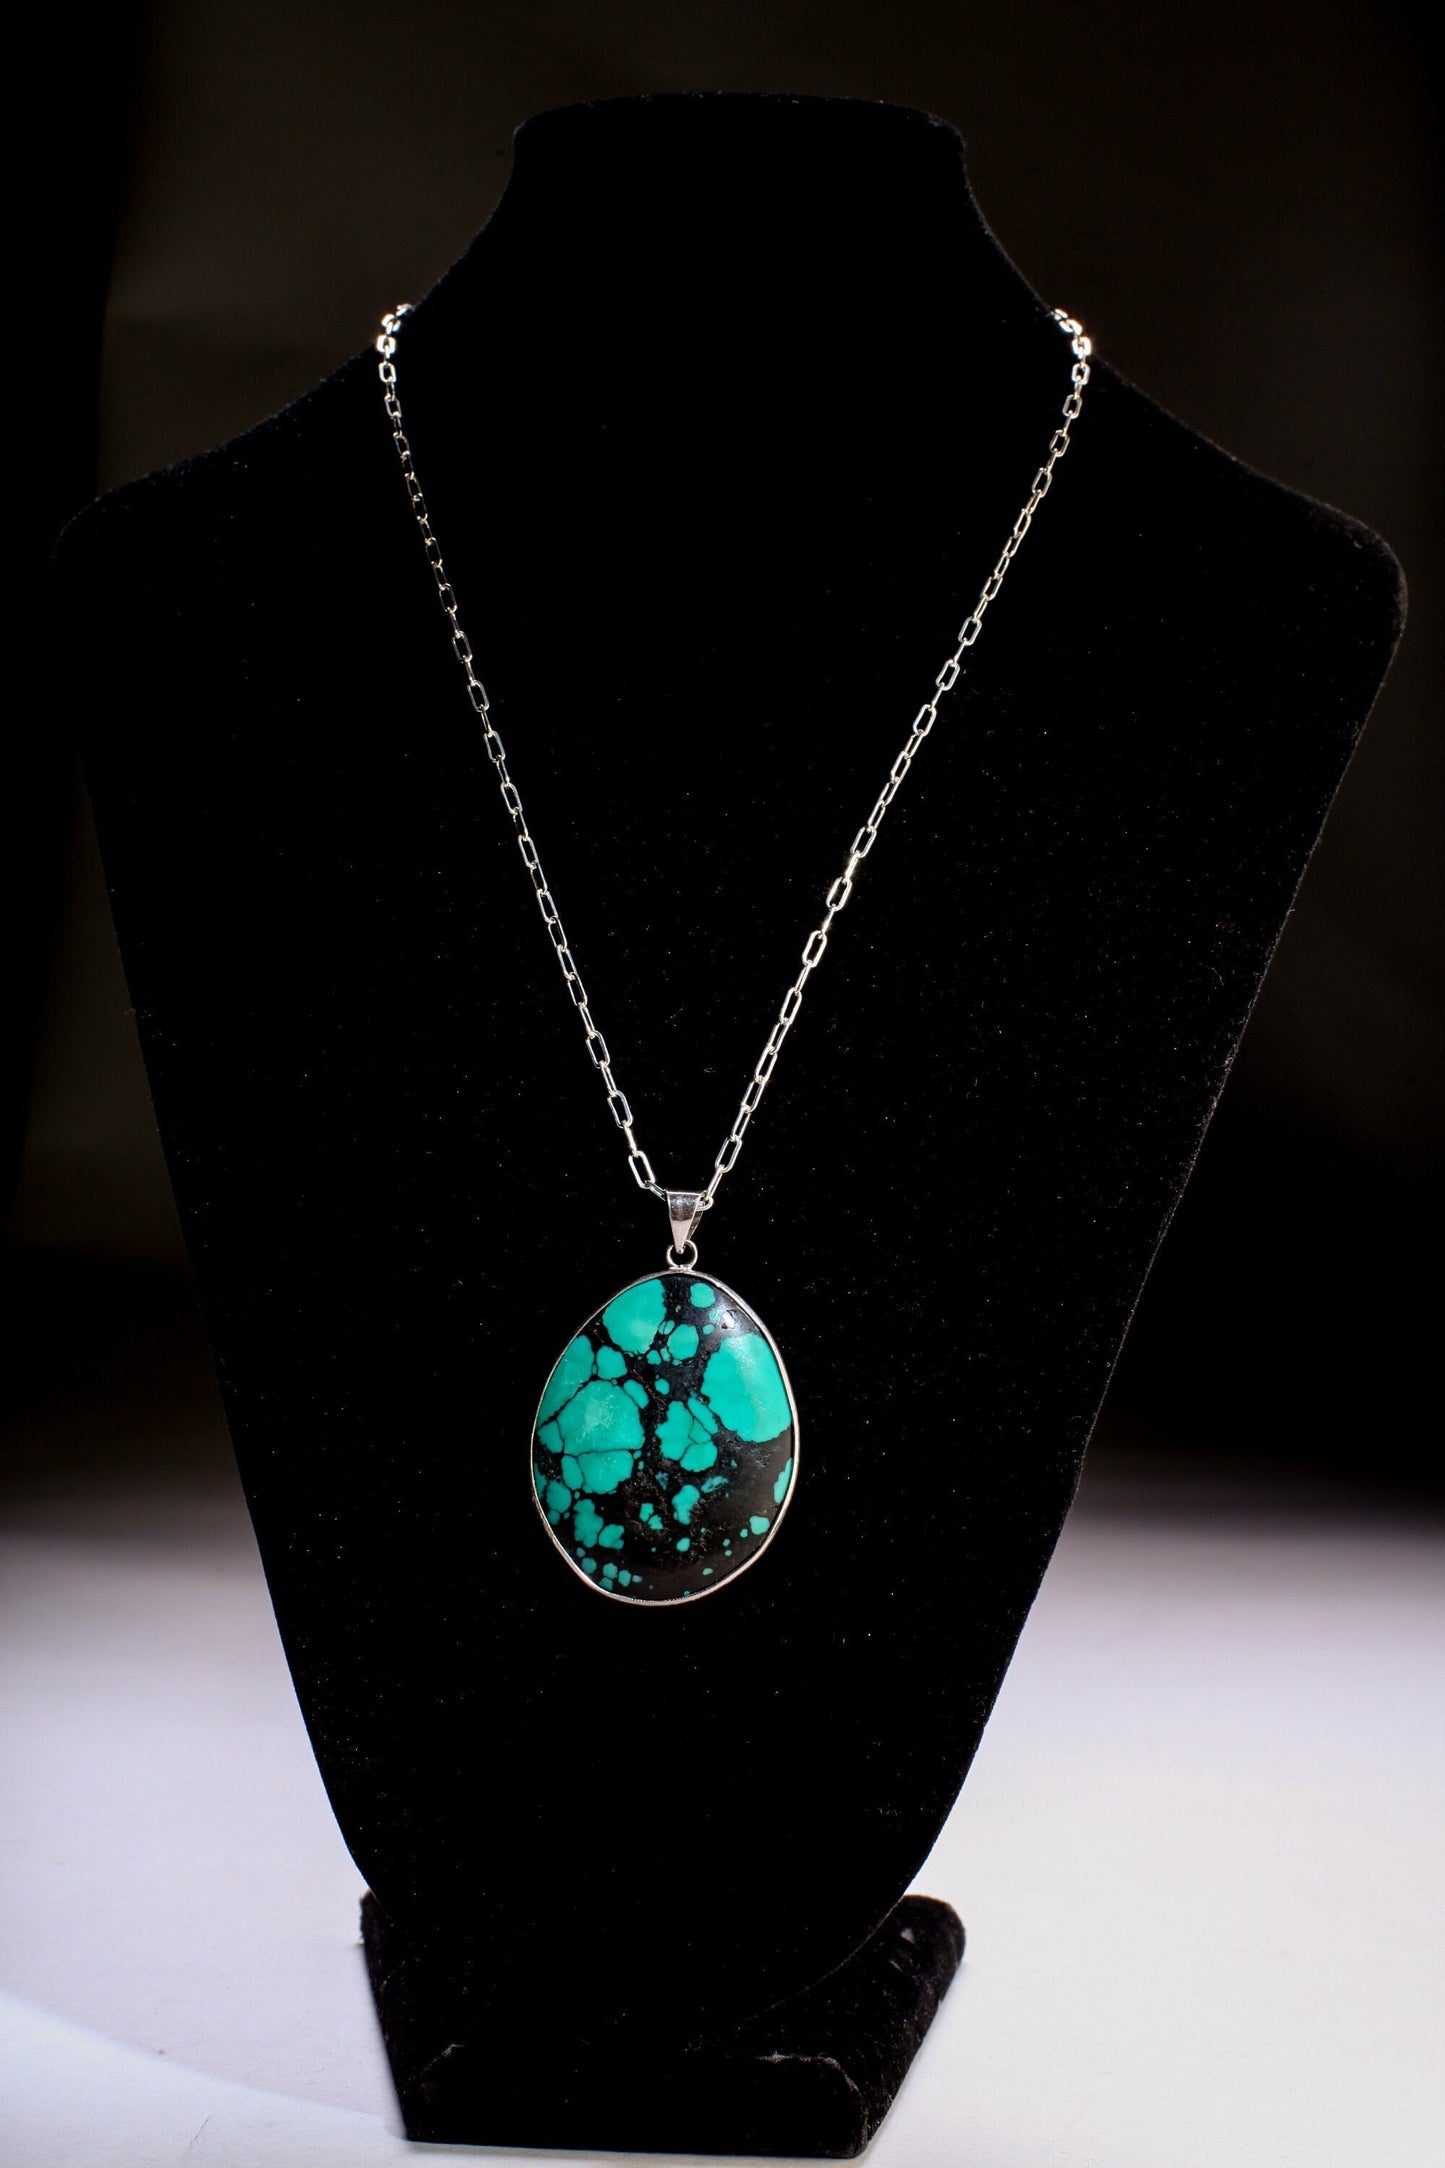 Turquoise Pendant, Genuine AAA Tibetan Spiderweb Turquoise Cab Gemstone 925 Sterling Silver Bezel Pendant, Option: Silver Chain,37x46mm 15g